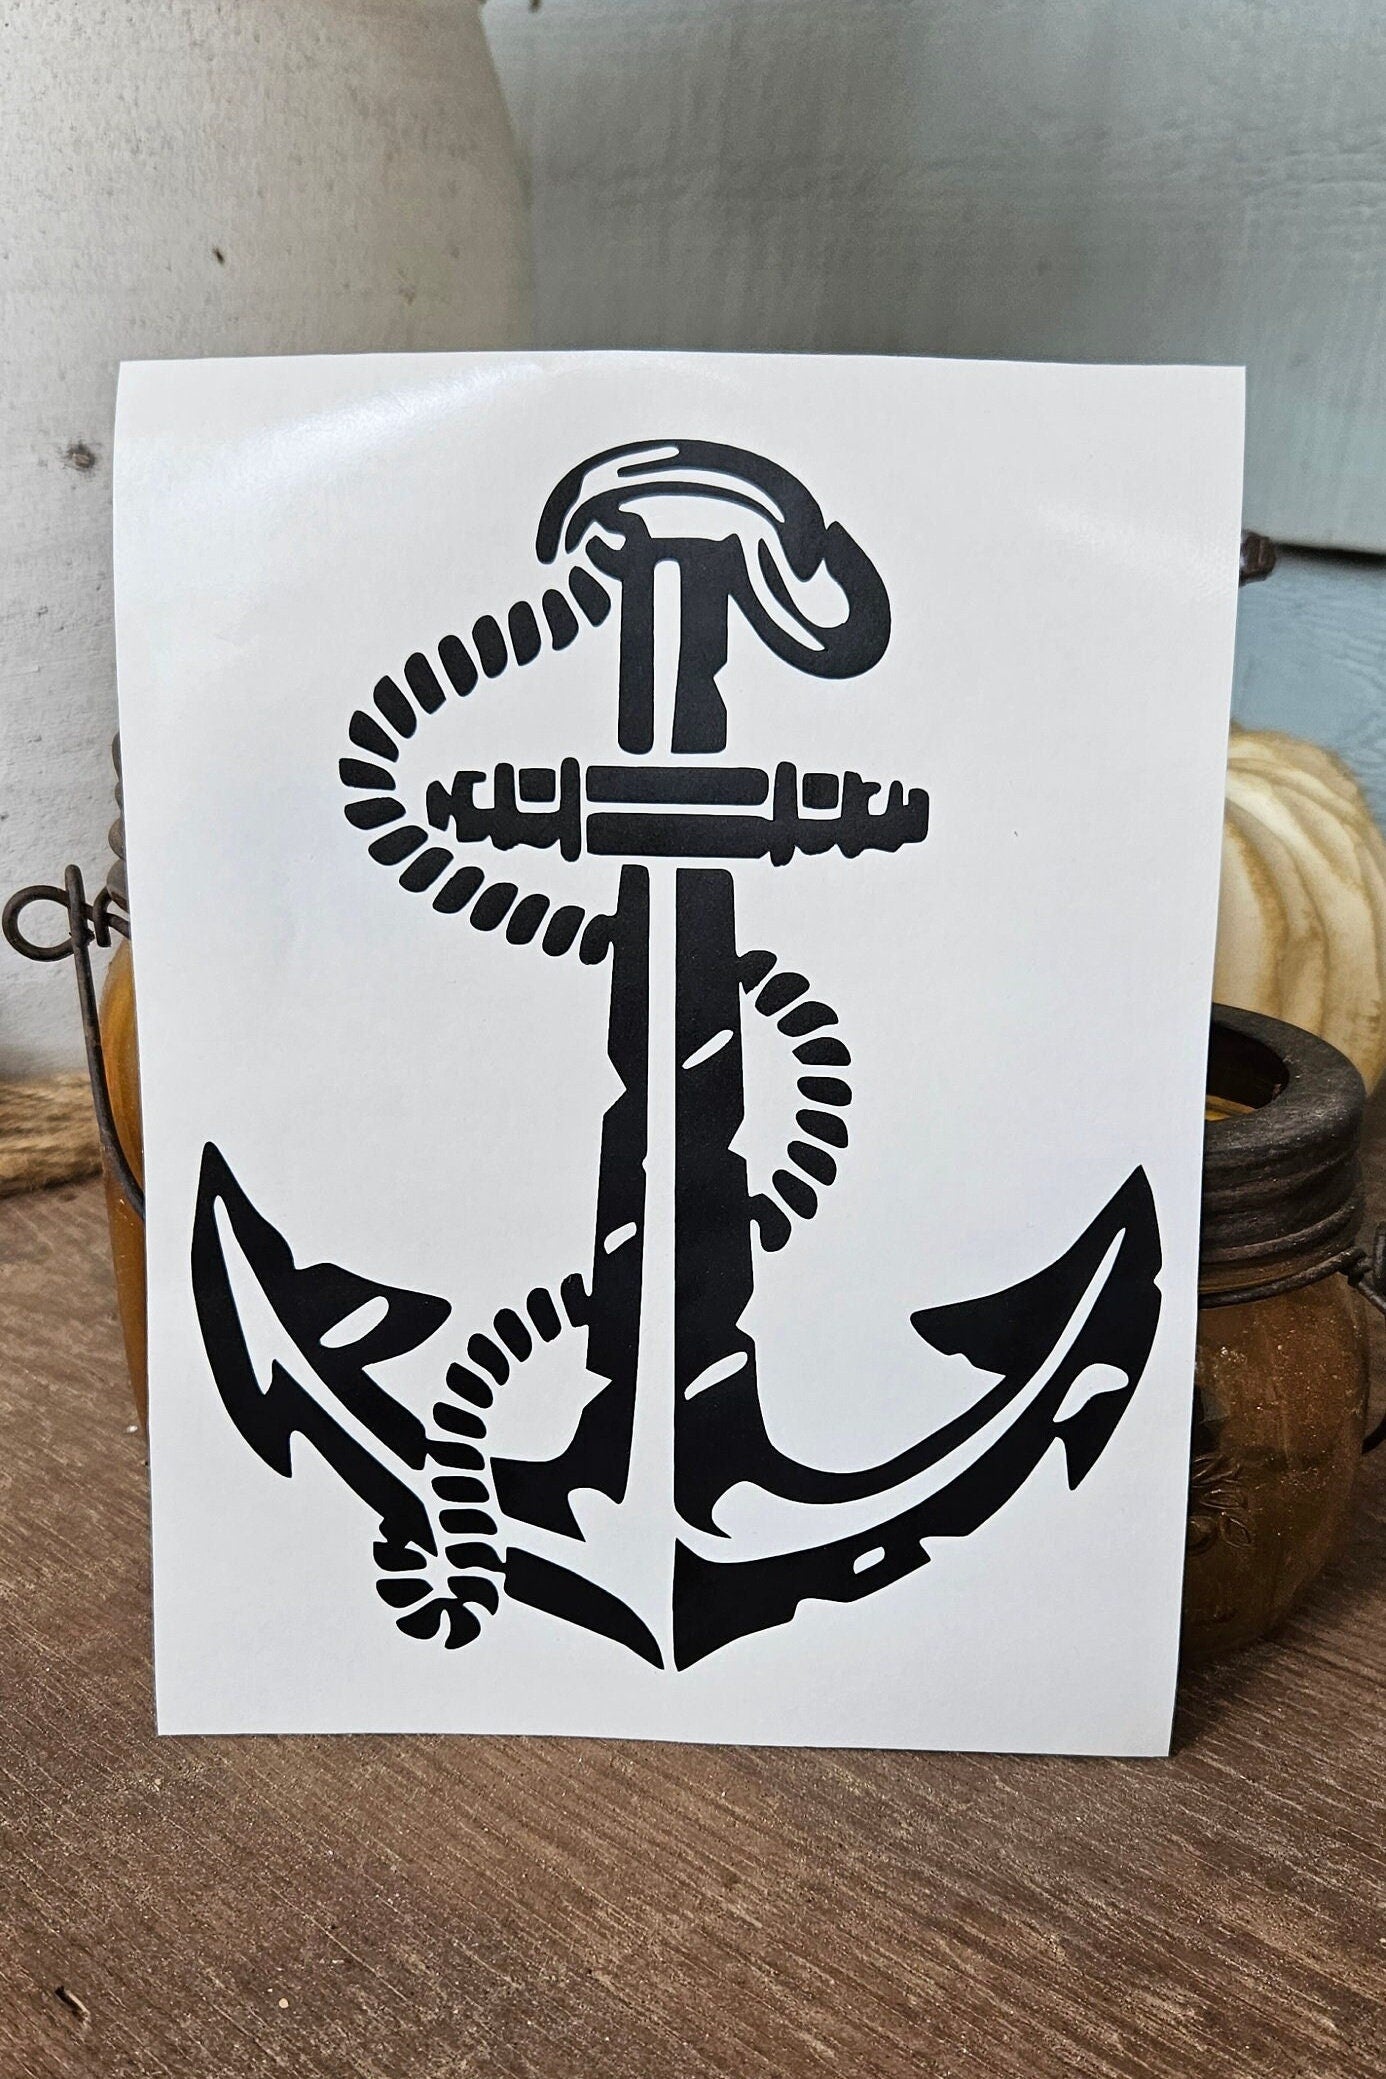 Rustic Distressed Anchor Vinyl Decal Sticker for Car Truck Cup Laptop Window | Nautical Anchor Decal | Ocean Decal Sticker Multiple Colors